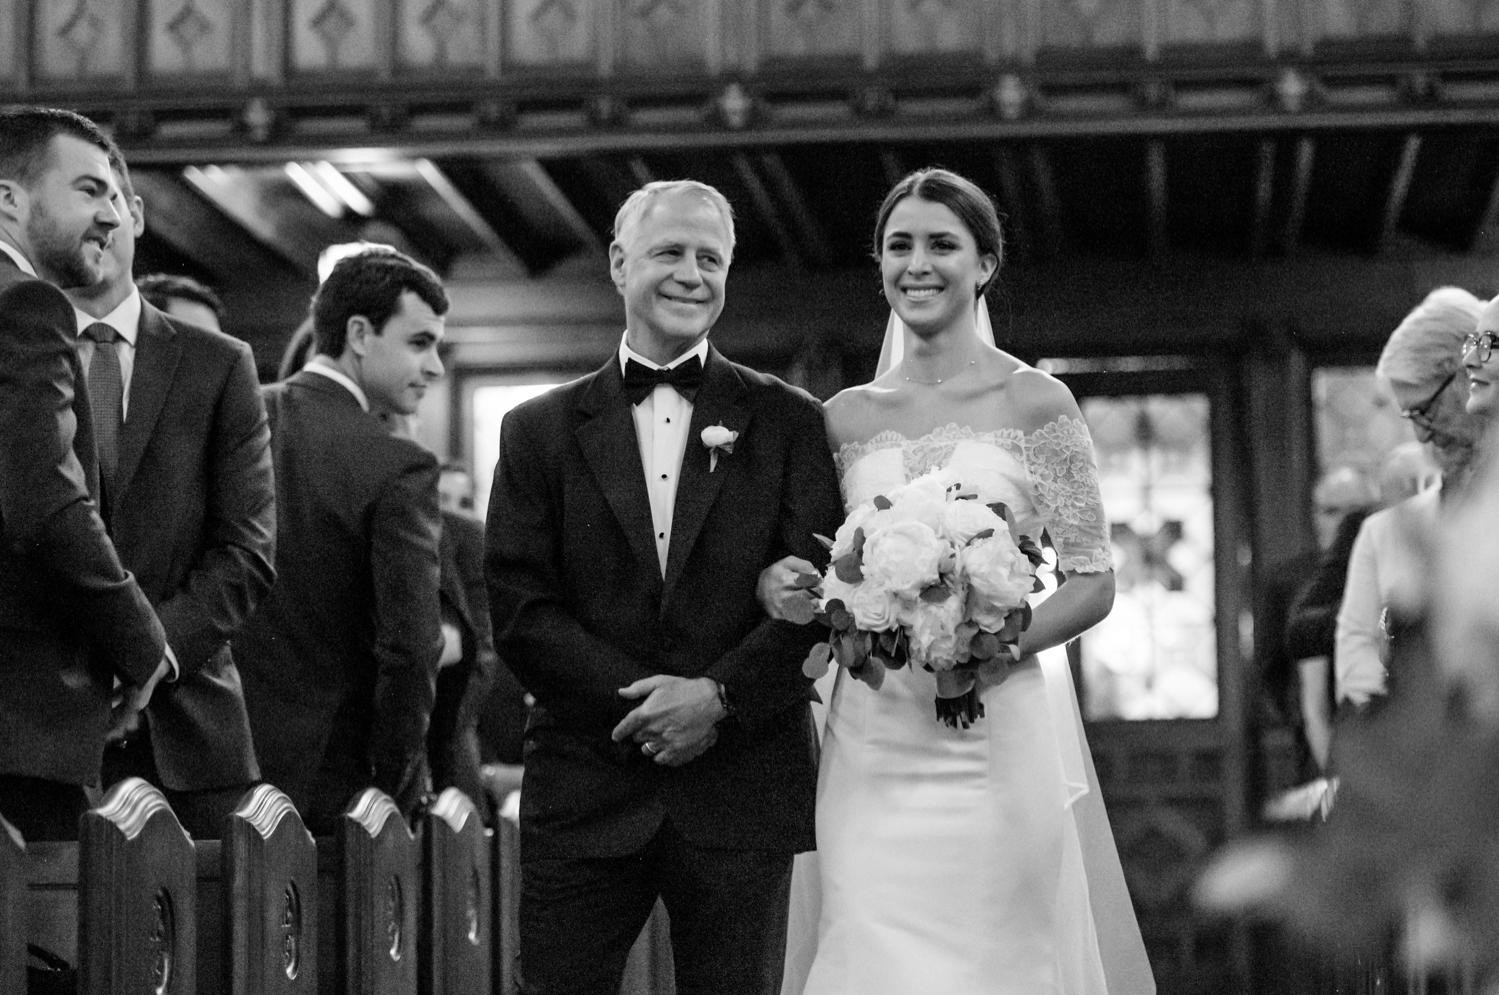 The bride and her father smile as they walk down the aisle together